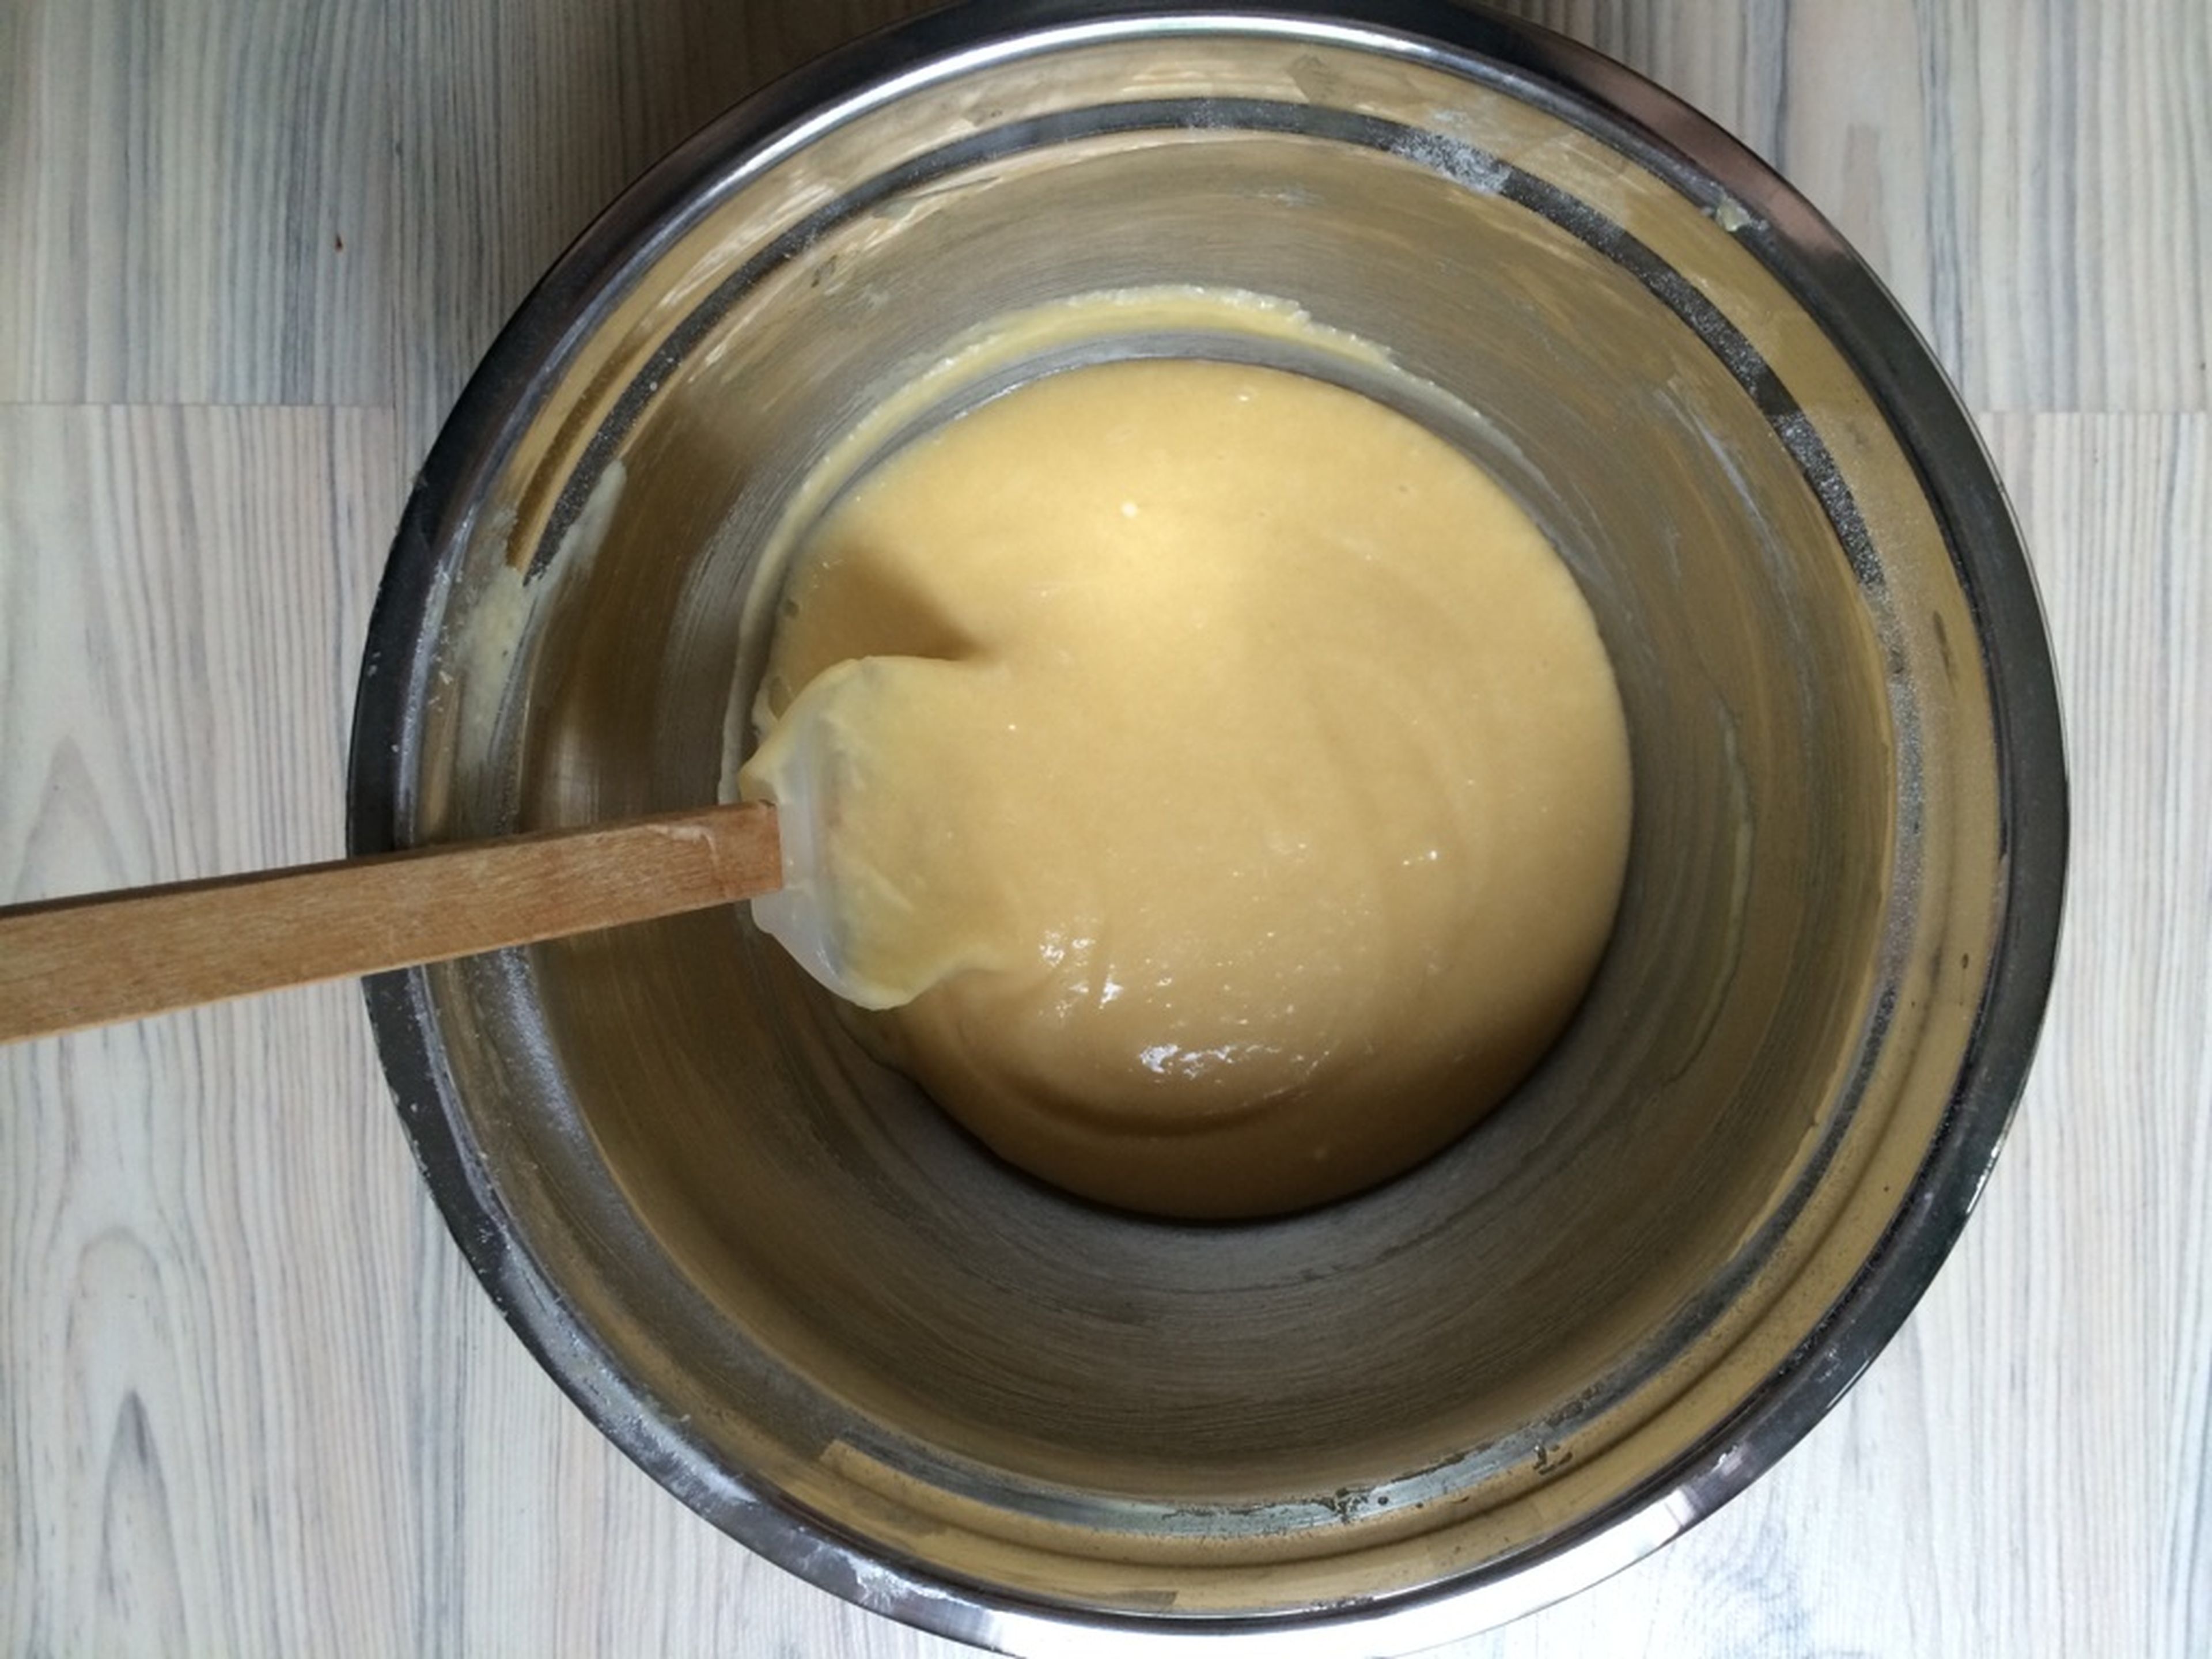 In the bowl of a stand mixer, beat the eggs with the salt. Add sugar and vanilla sugar and mix until just combined. In a separate bowl, combine the flour and baking powder. Add to the mixer, then mix in the melted butter.